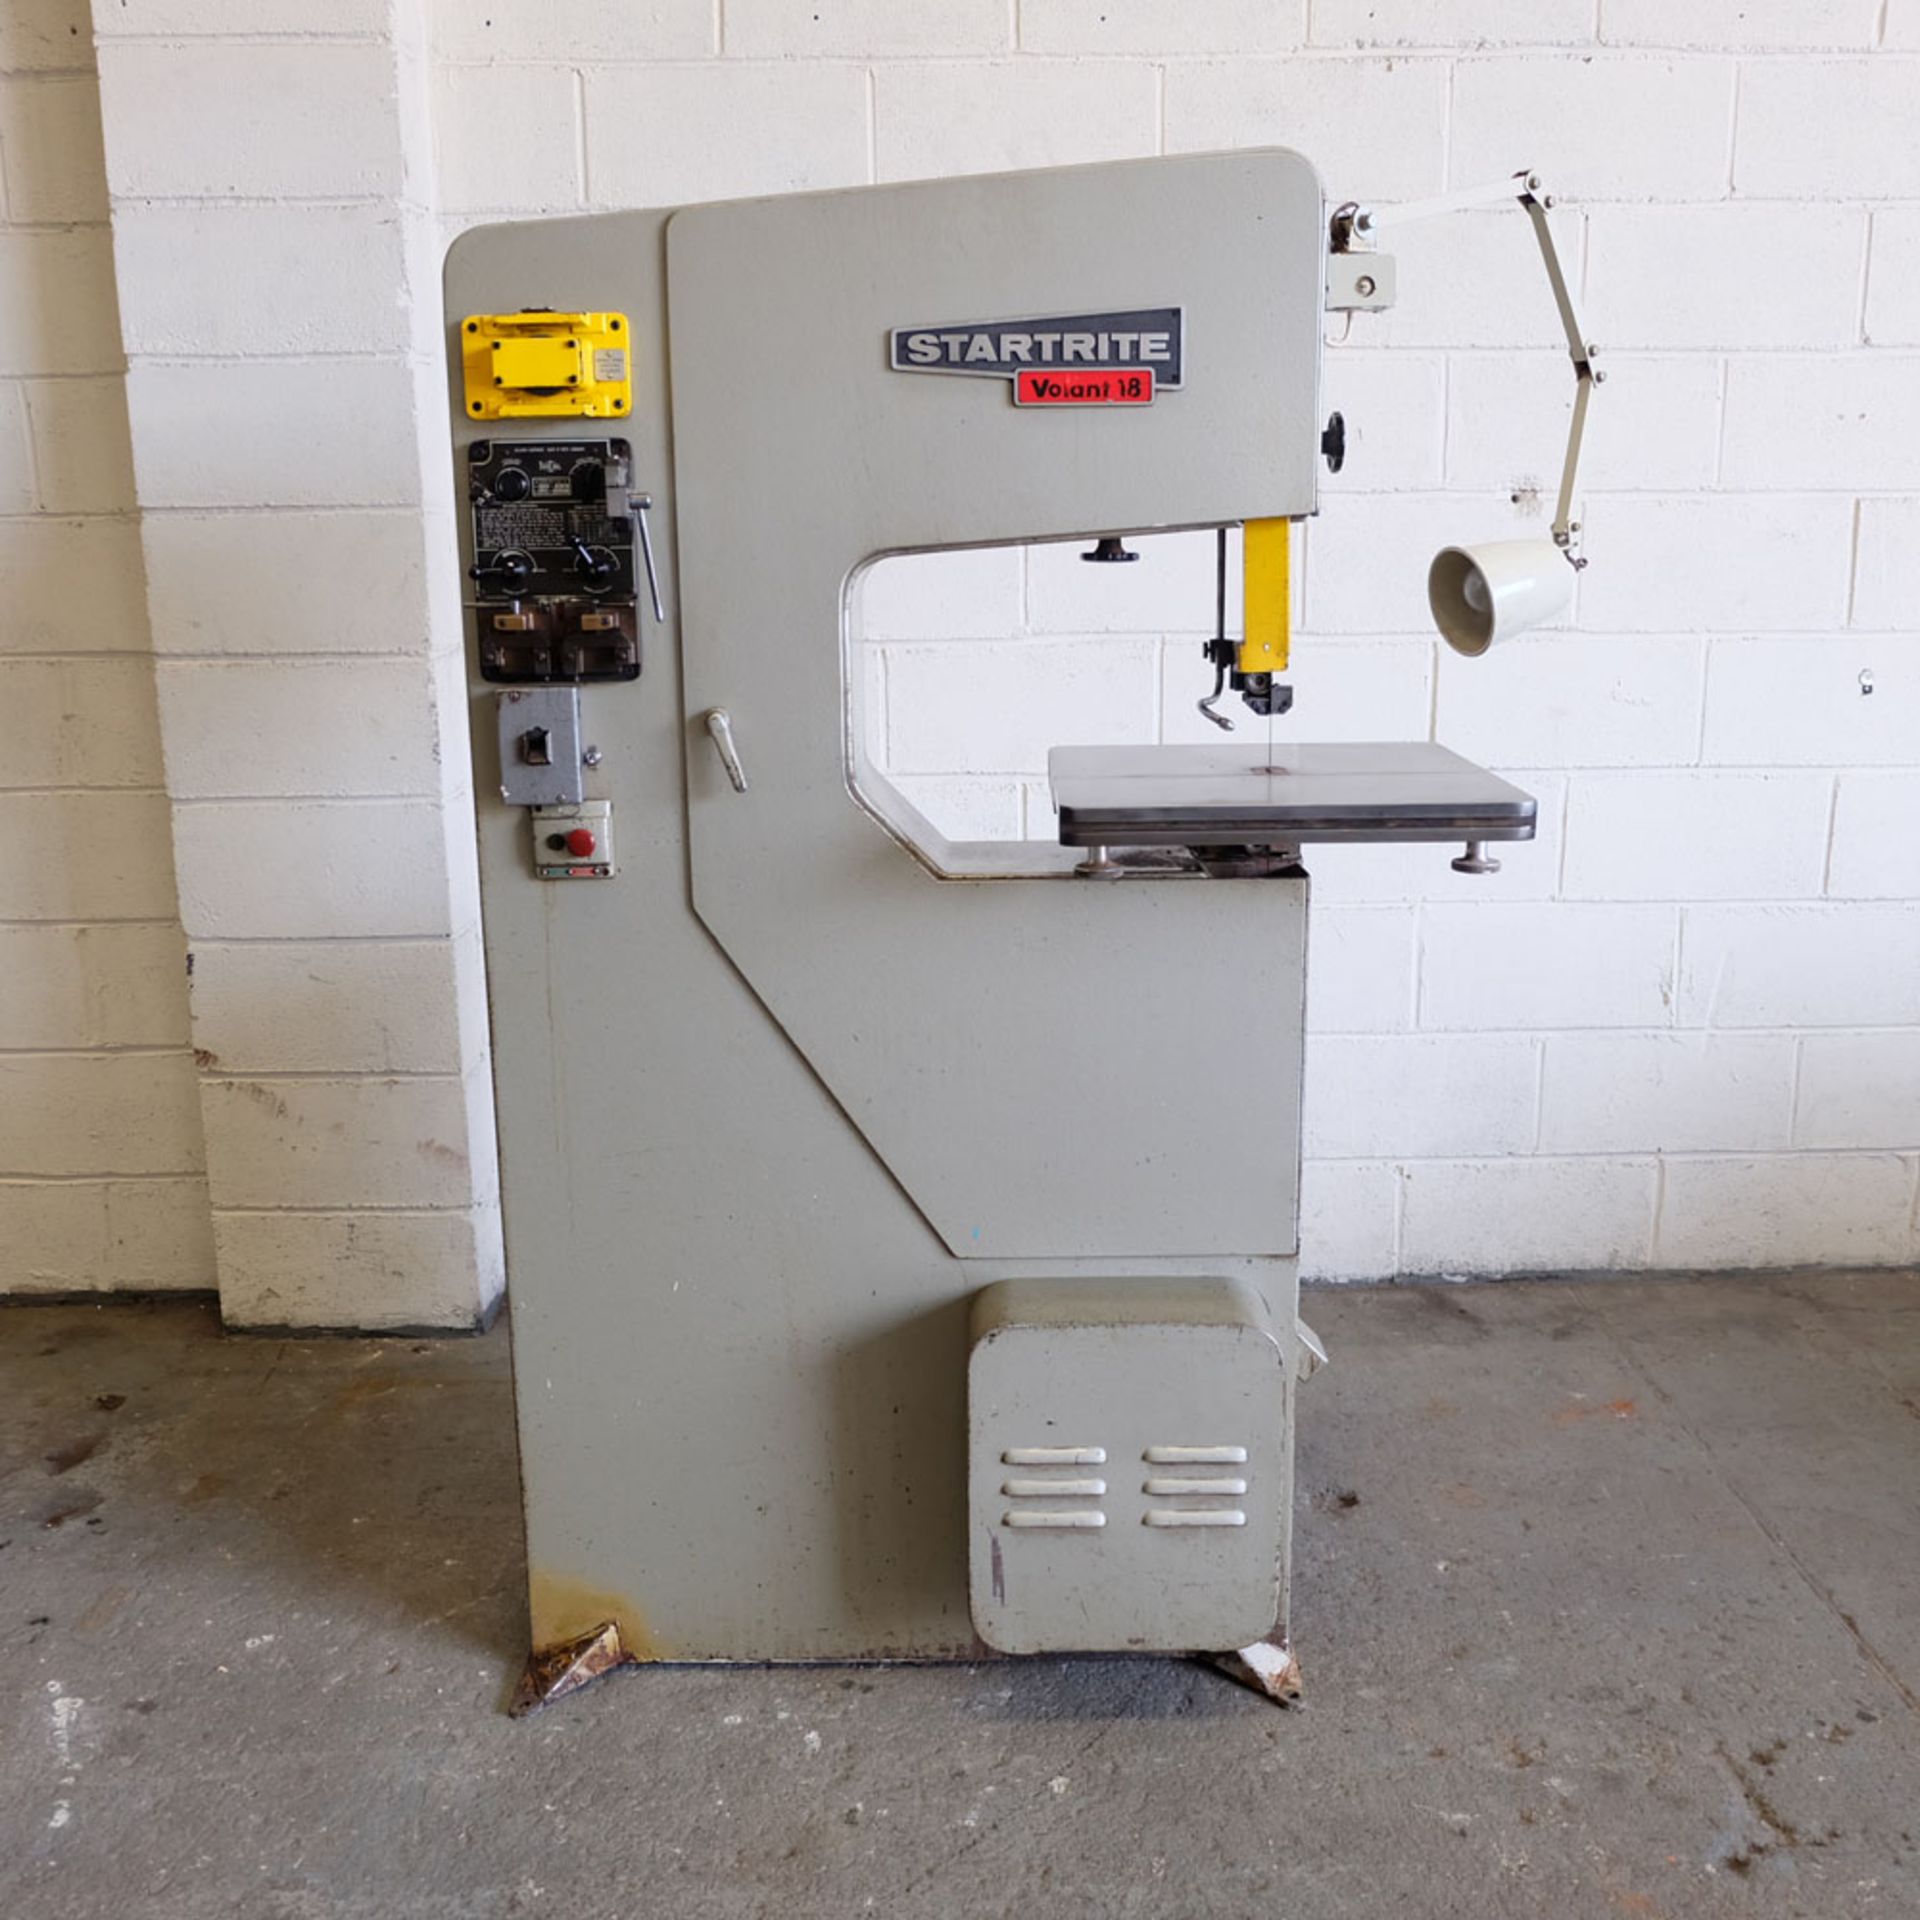 Startrite Volant 18 Vertical Tool Room Bandsaw.